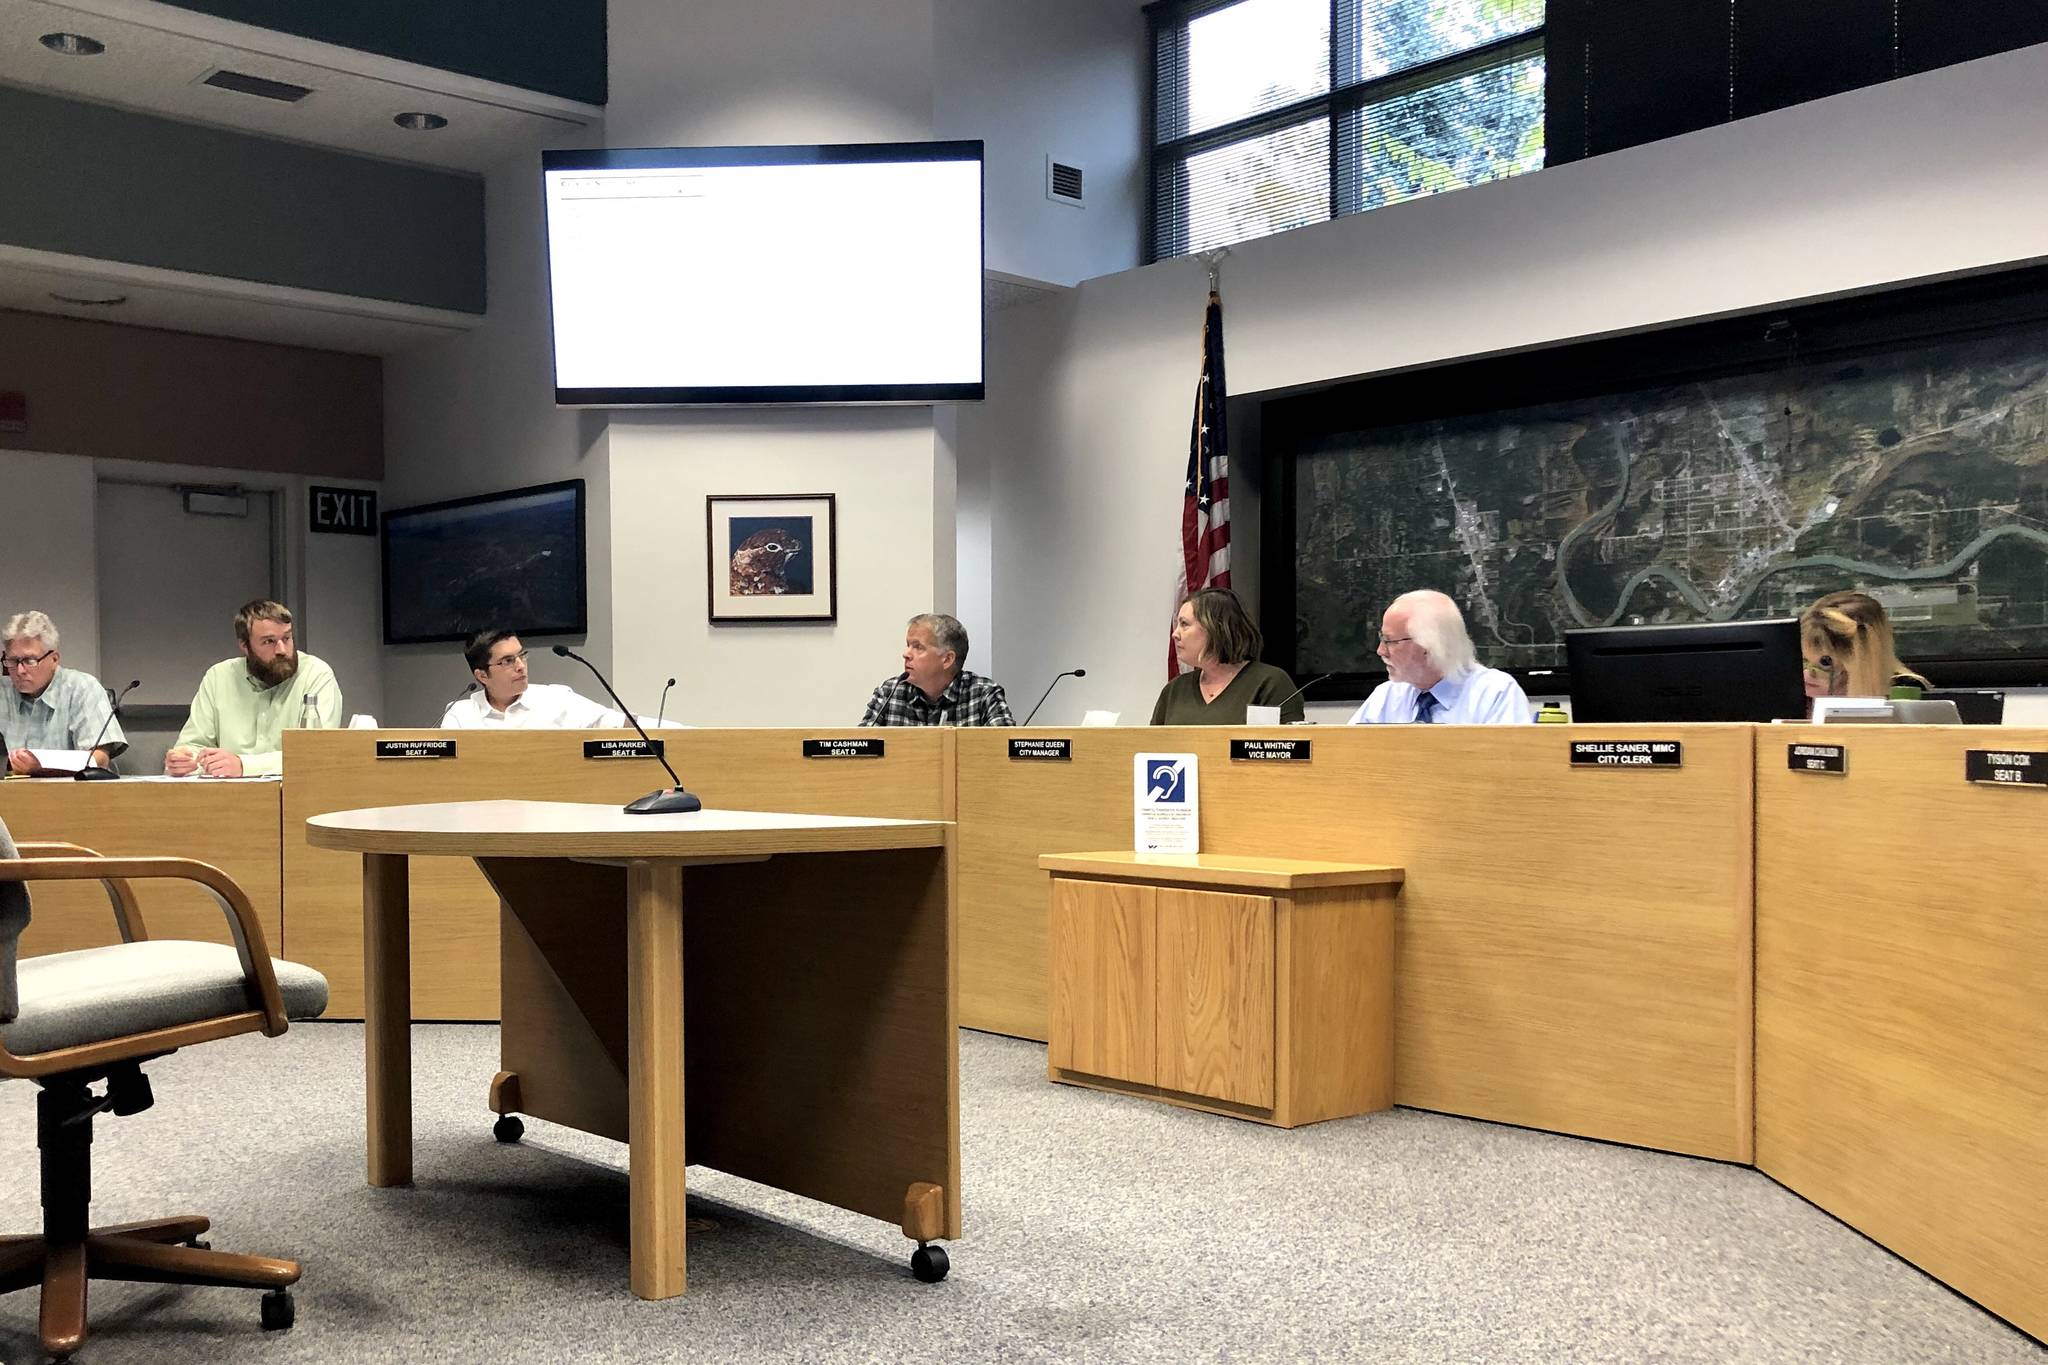 Soldotna City Council members are pictured on Thursday, Sept. 12, 2019 at Soldotna City Hall in Soldotna, Alaska. The council voted to postpone a resolution that would authorize the city manager to submit a petition to annex to the state’s Local Boundary Commission. (Photo by Victoria Petersen/Peninsula Clarion)